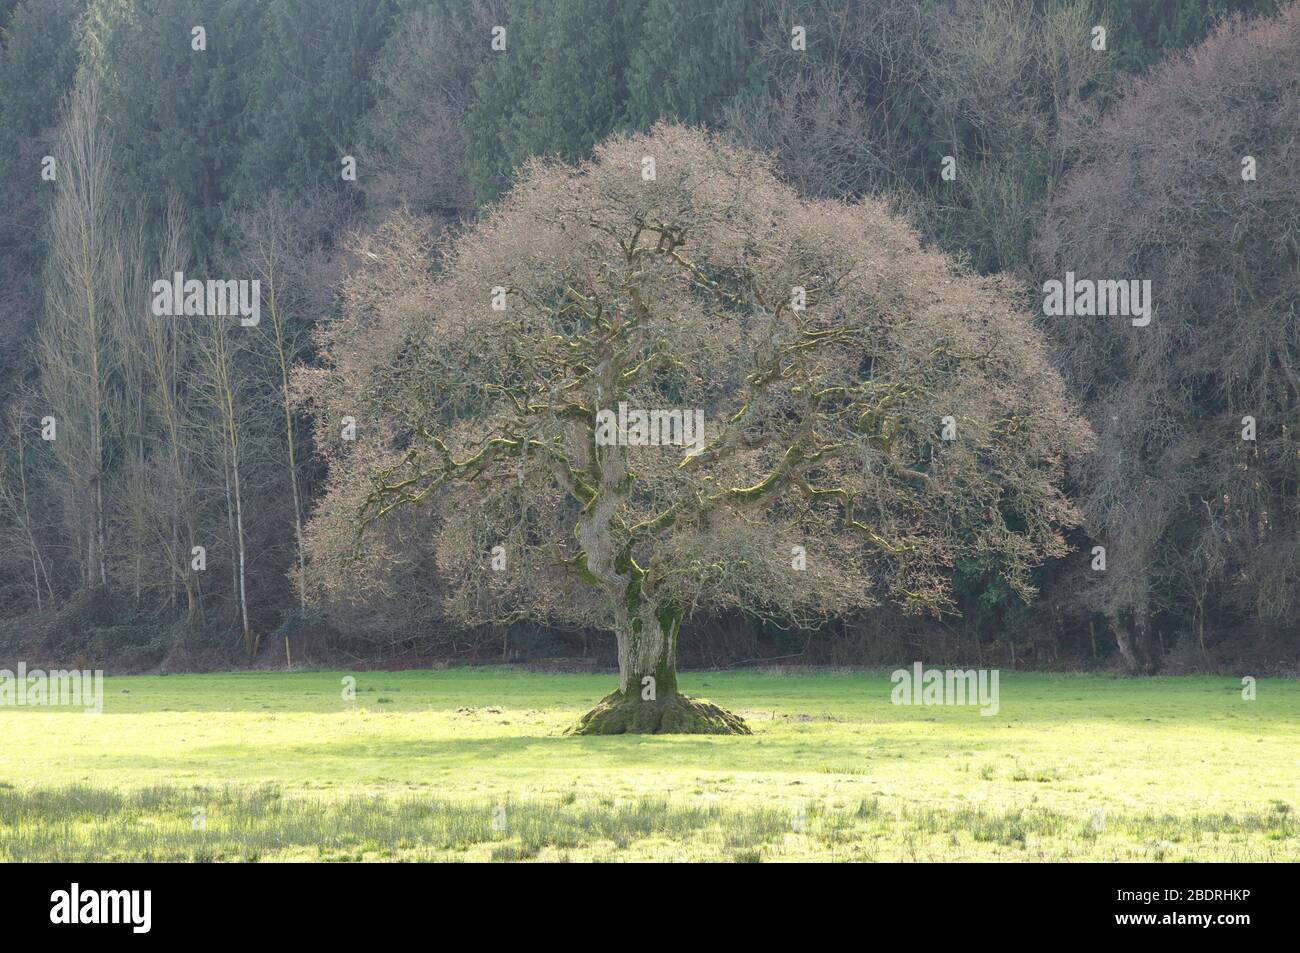 An English Oak (Quercus robur), the most common tree species in Britain, stands alone in a meadow its branches bare and leafless in Winter. Dorset, UK. Stock Photo